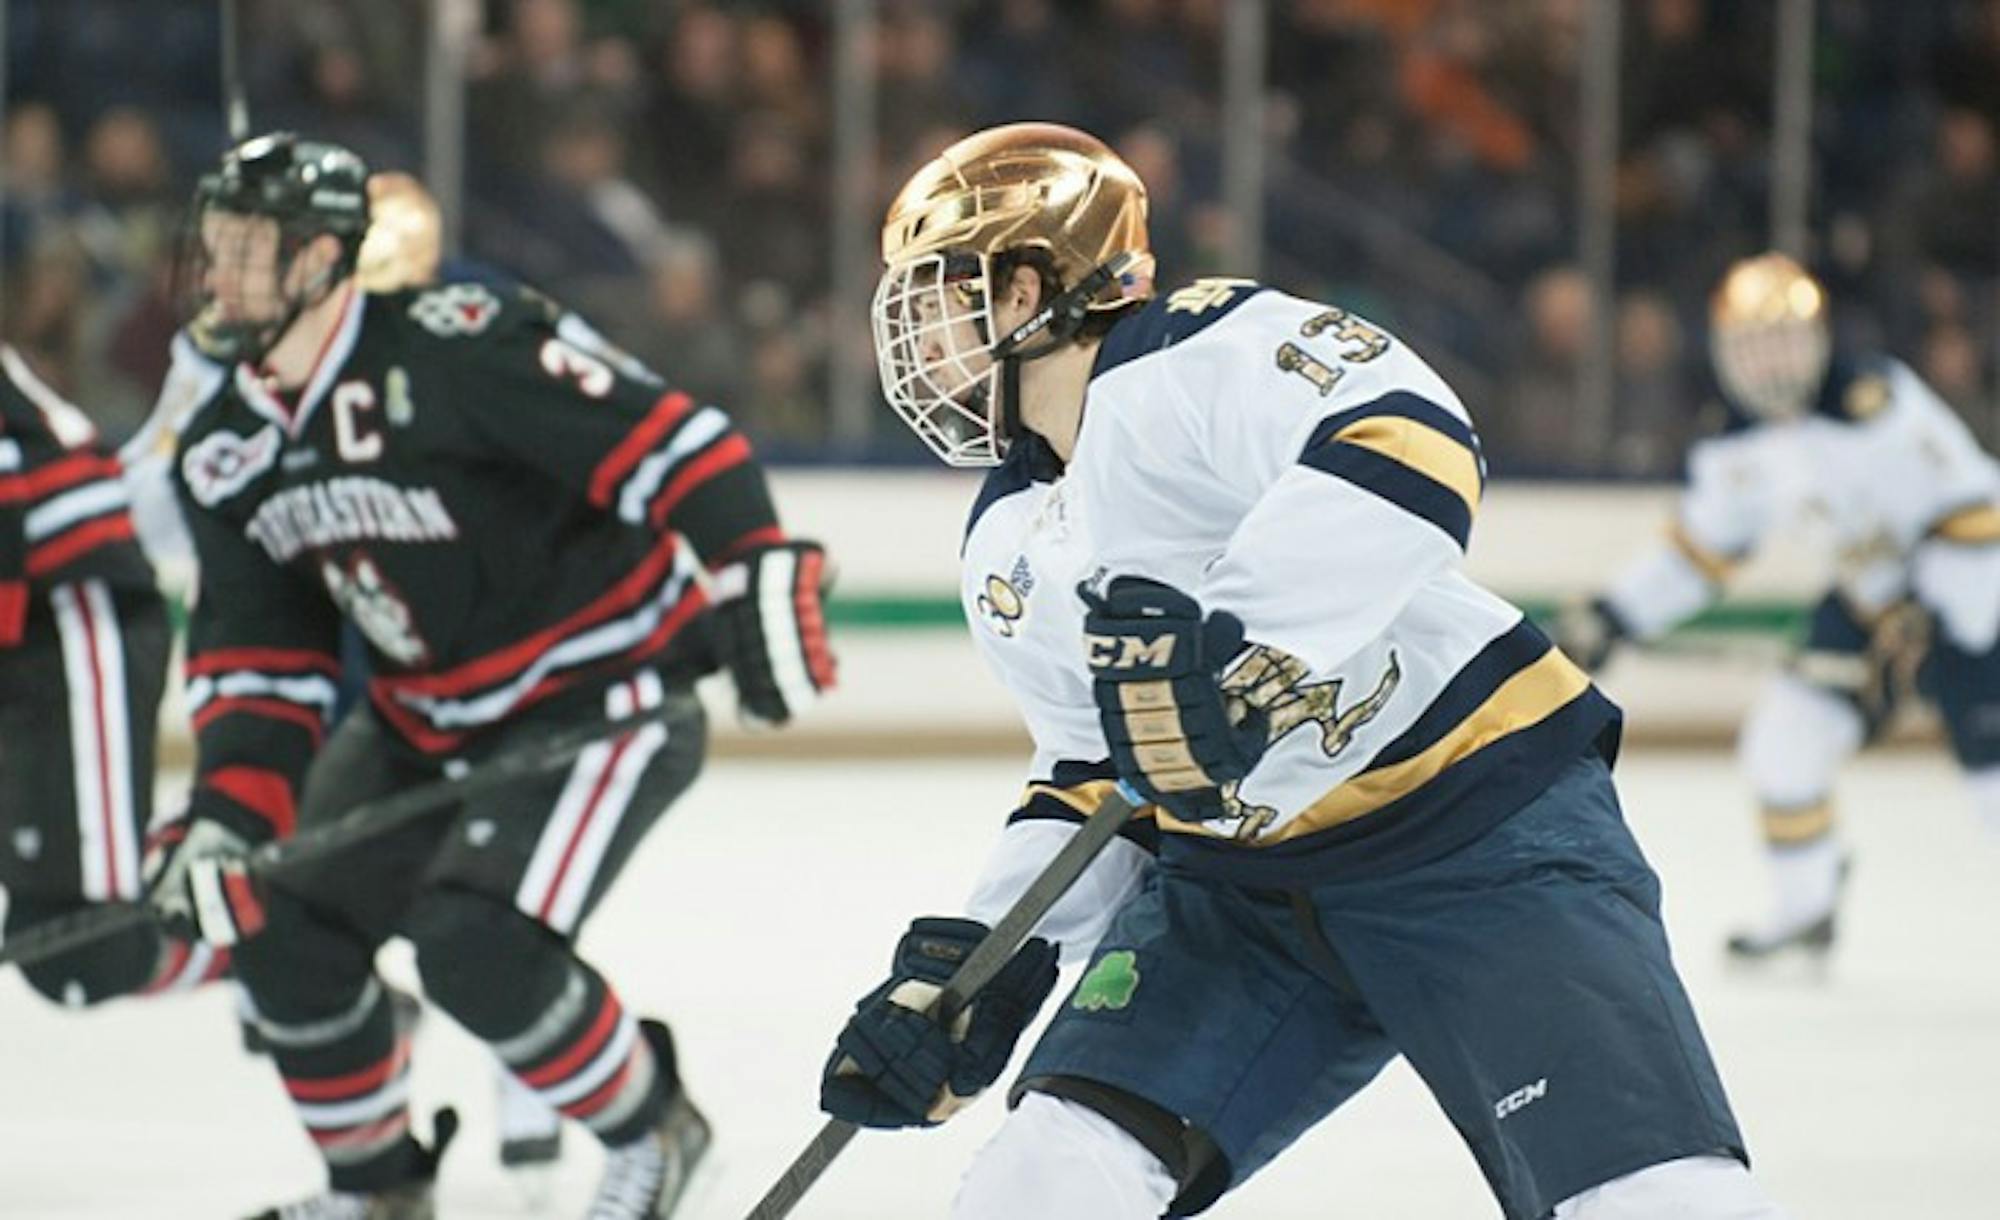 Freshman center Vince Hinostroza skates ahead against Northeastern in Notre Dame's 4-0 loss Friday.